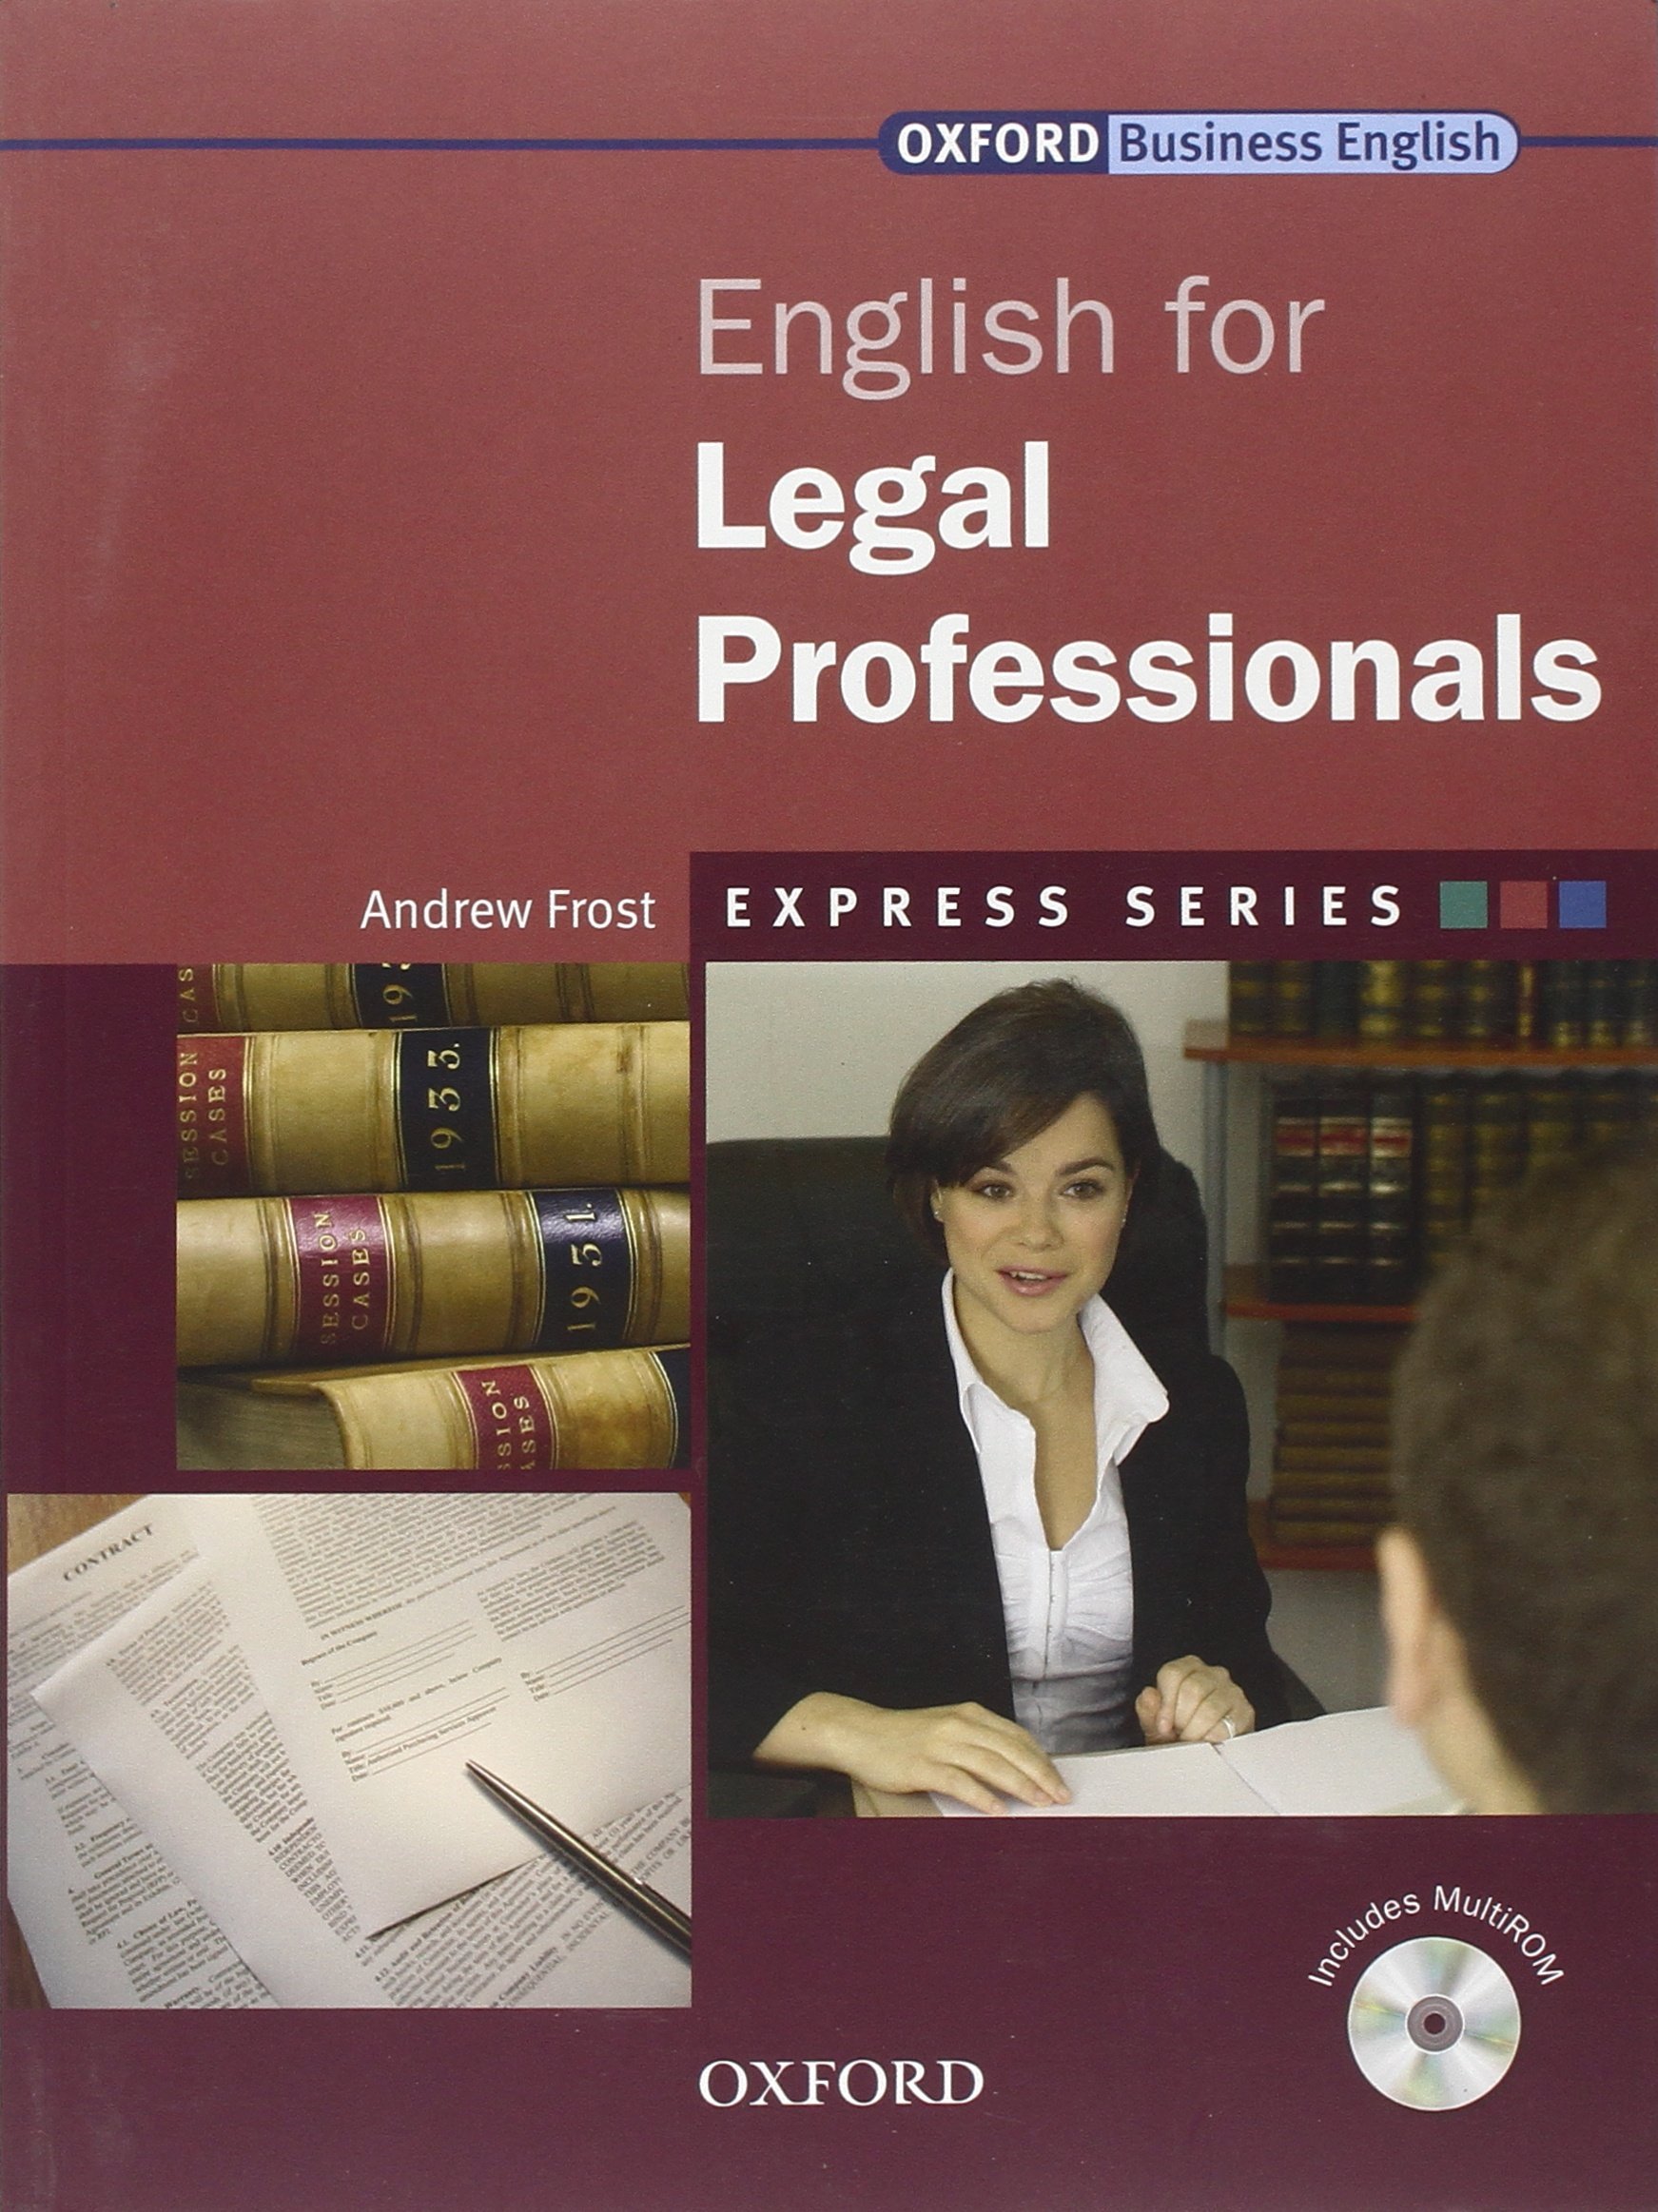 ENGLISH FOR LEGAL PROFESSIONALS (EXPRESS SERIES) Student's Book + Multi-ROM